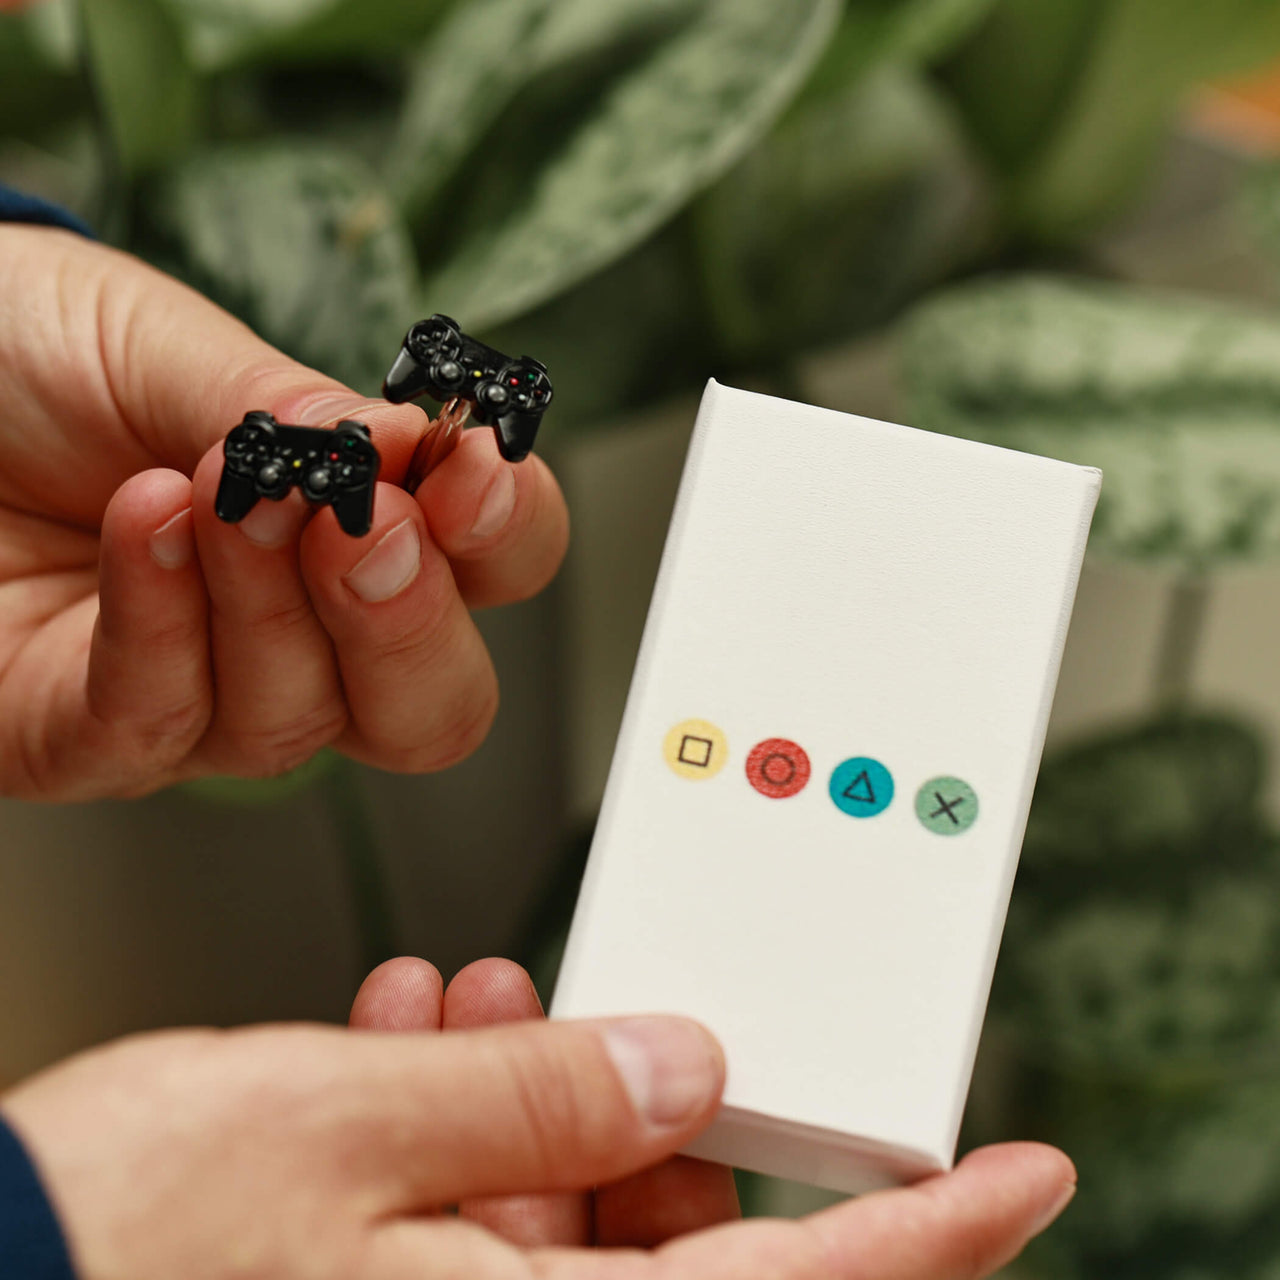 The Ultimate Gamer's Cufflinks In A Gift Box